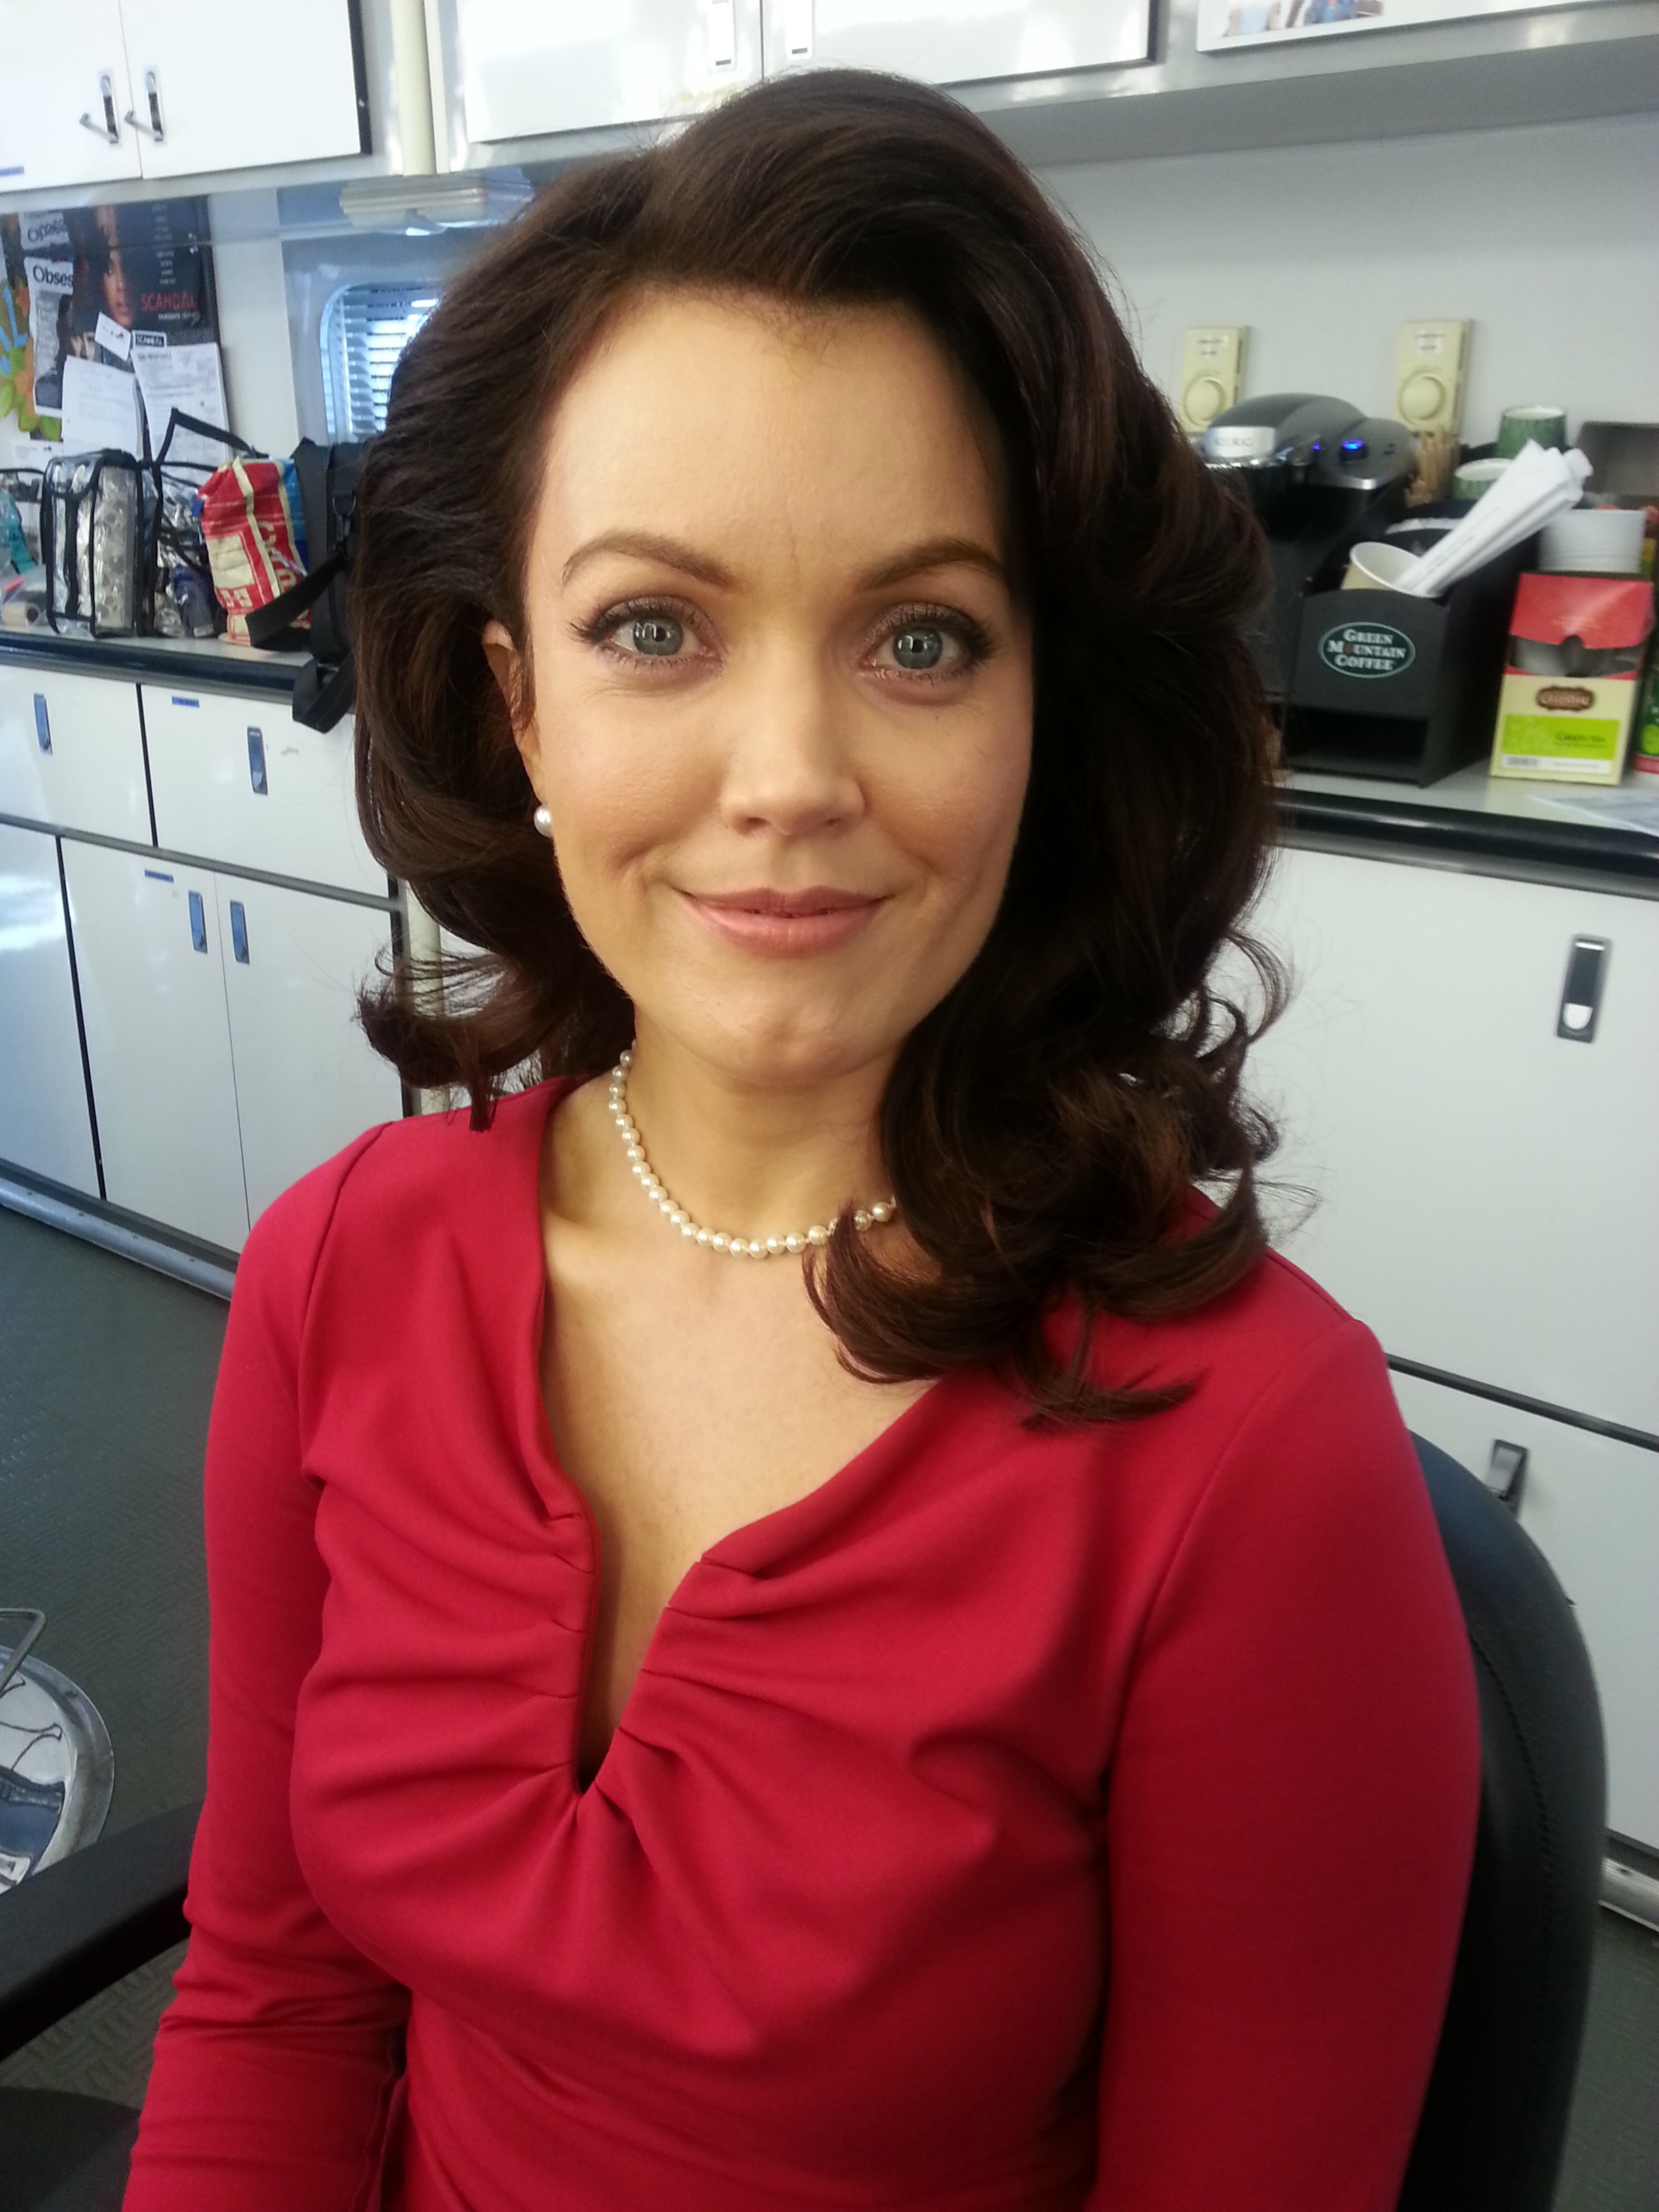 Scandal Season 3 Bellamy Young stars as 1st lady Mellie Grant